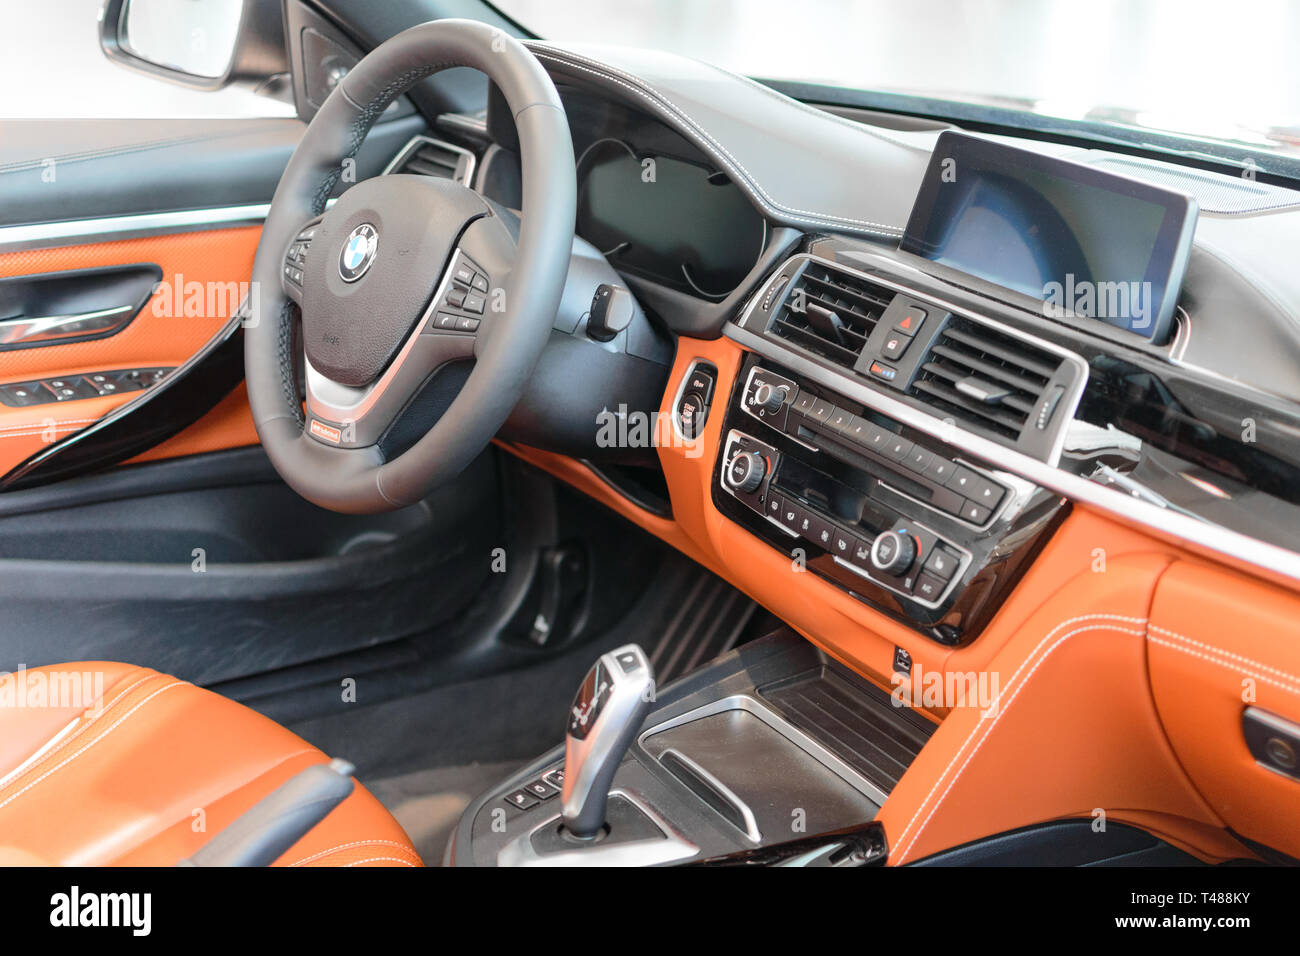 Munich, Germany - April 21, 2018: Interior of new flagship model BMW 7 Series full-size luxury sedan in executive G11/G12 sixth generation production Stock Photo